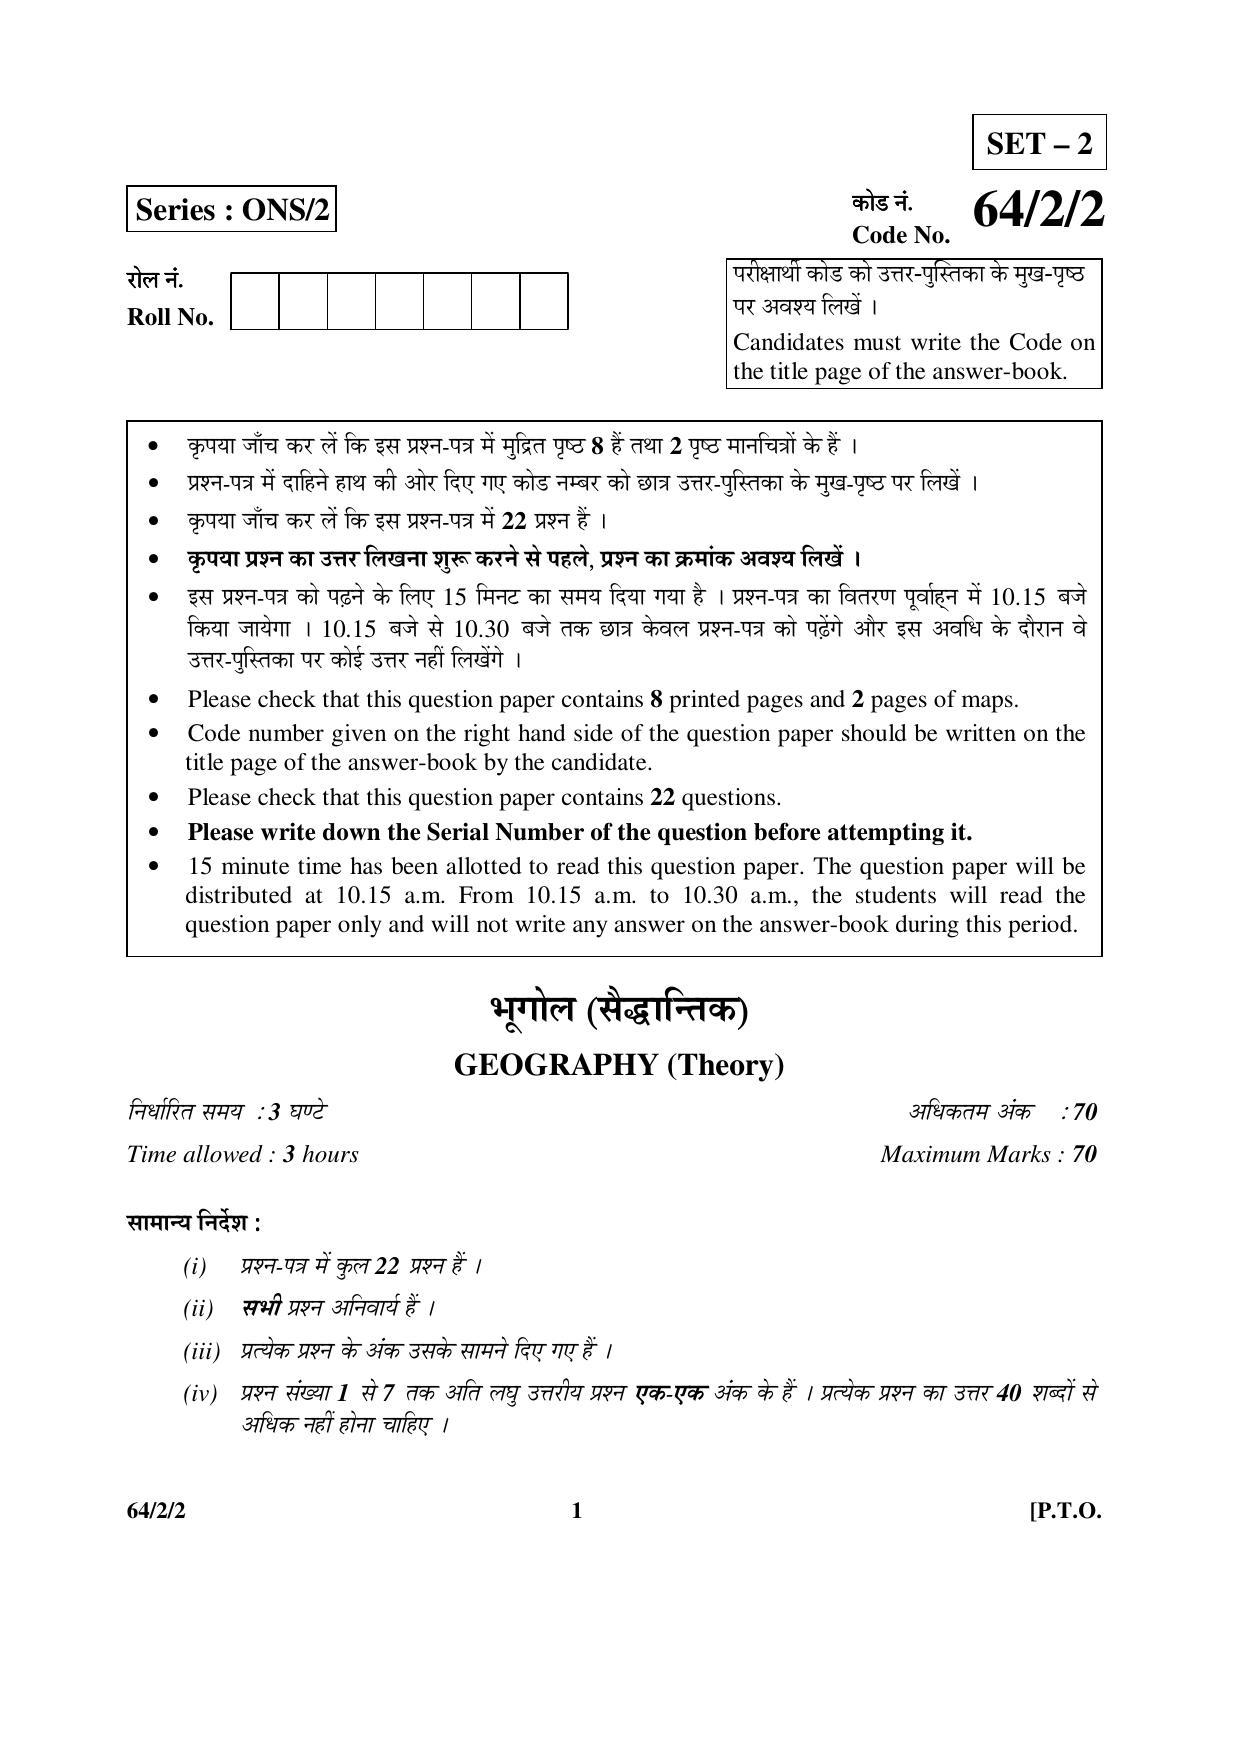 CBSE Class 12 64-2-2 Geography 2016 Question Paper - Page 1